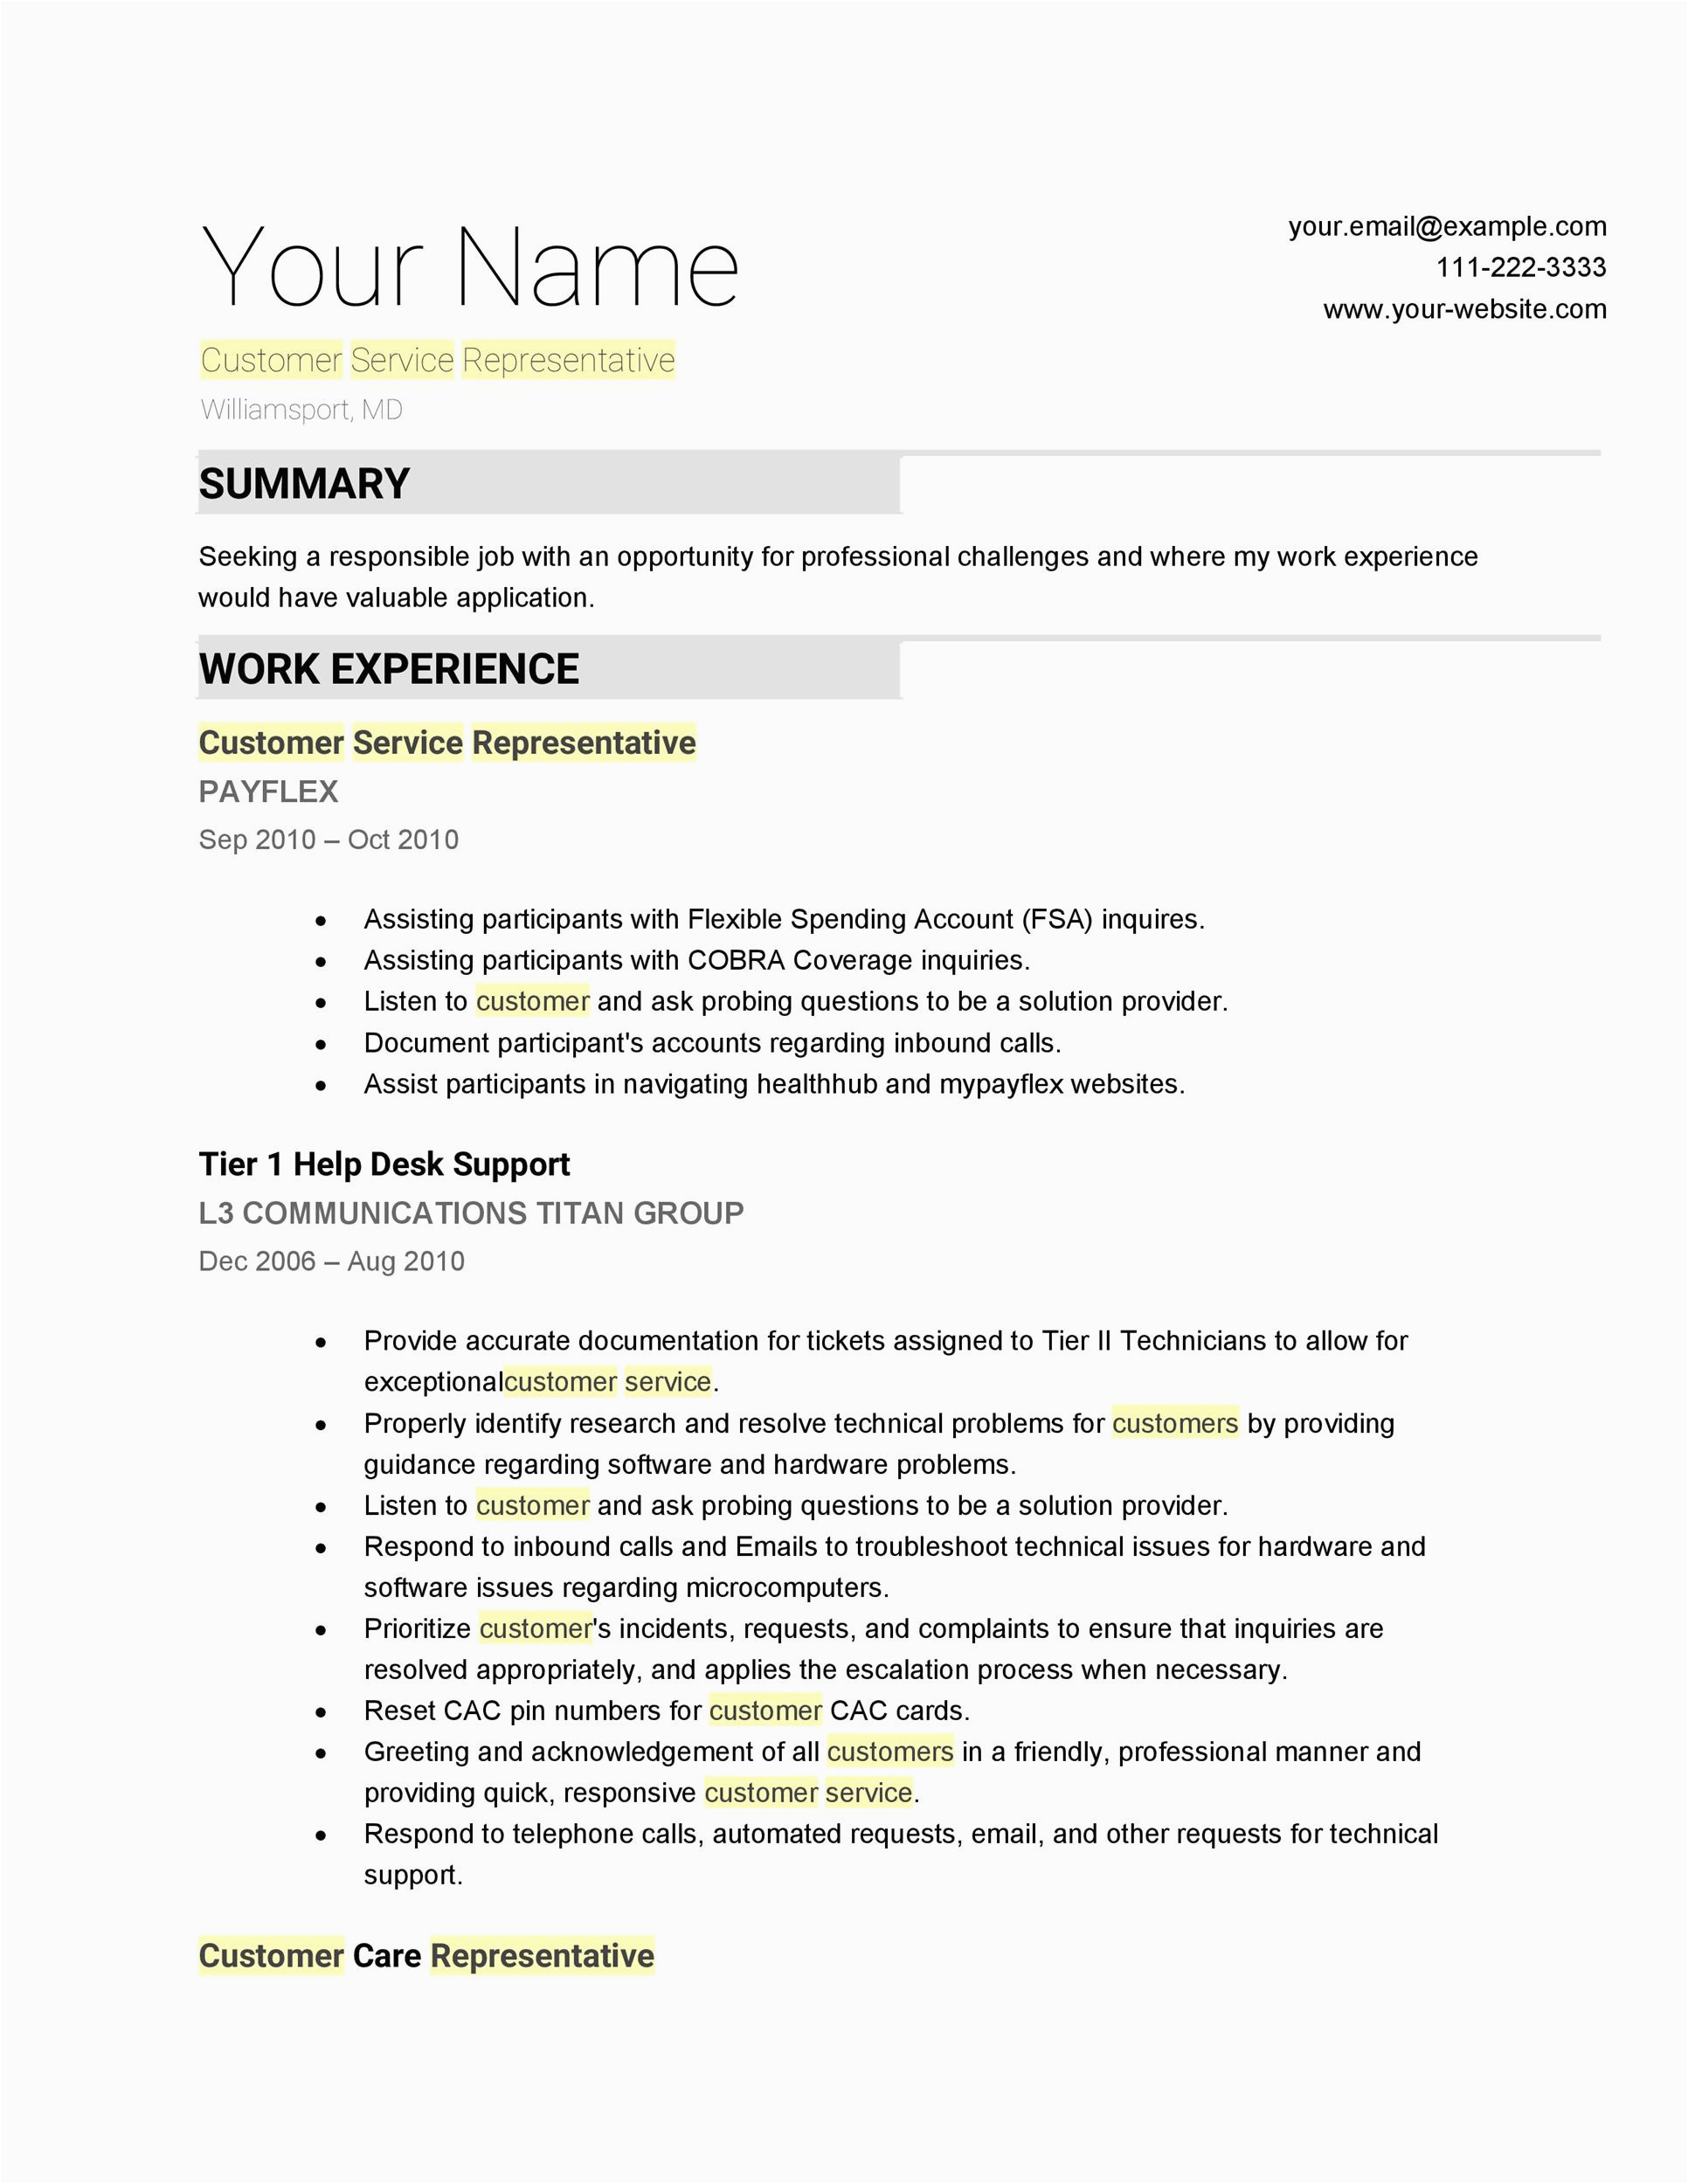 Sample Resume for Customer Service Jobs 30 Customer Service Resume Examples Template Lab